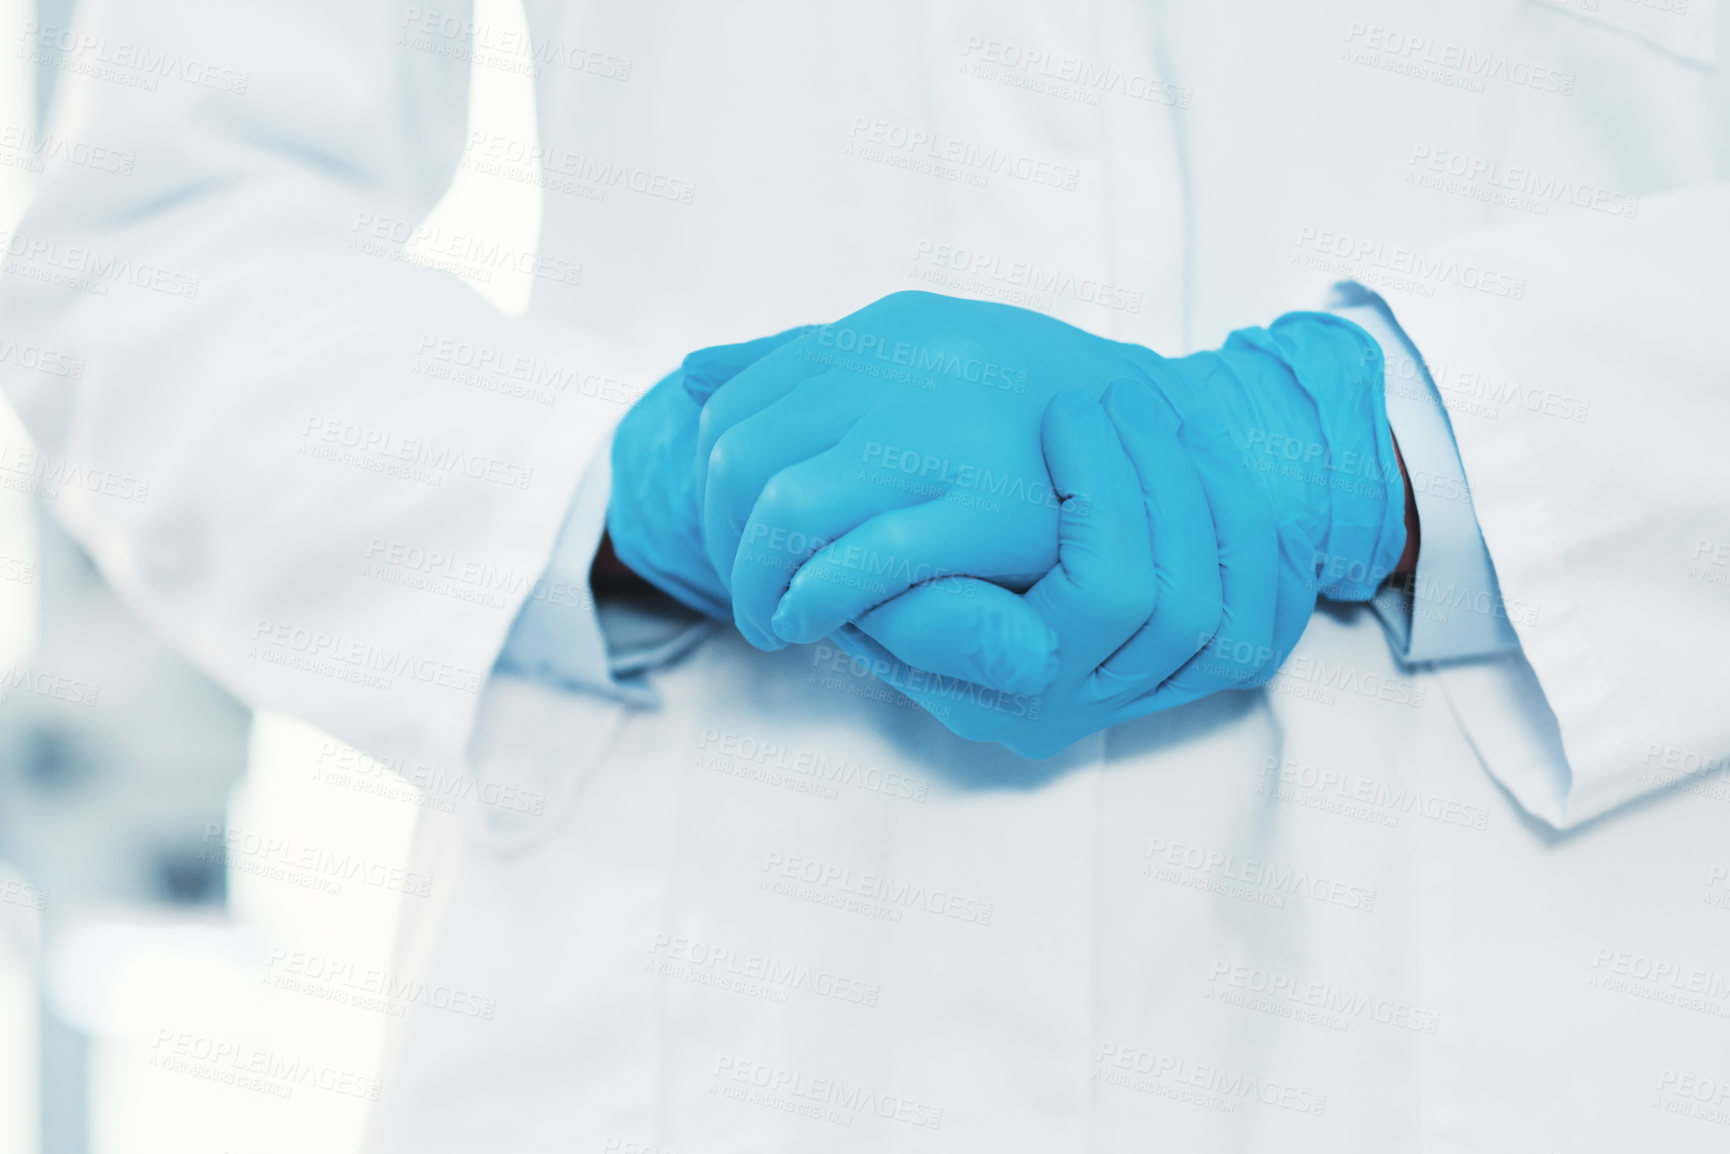 Buy stock photo Cropped shot of an unrecognizable scientist wearing gloves while holding her hands together inside of a laboratory